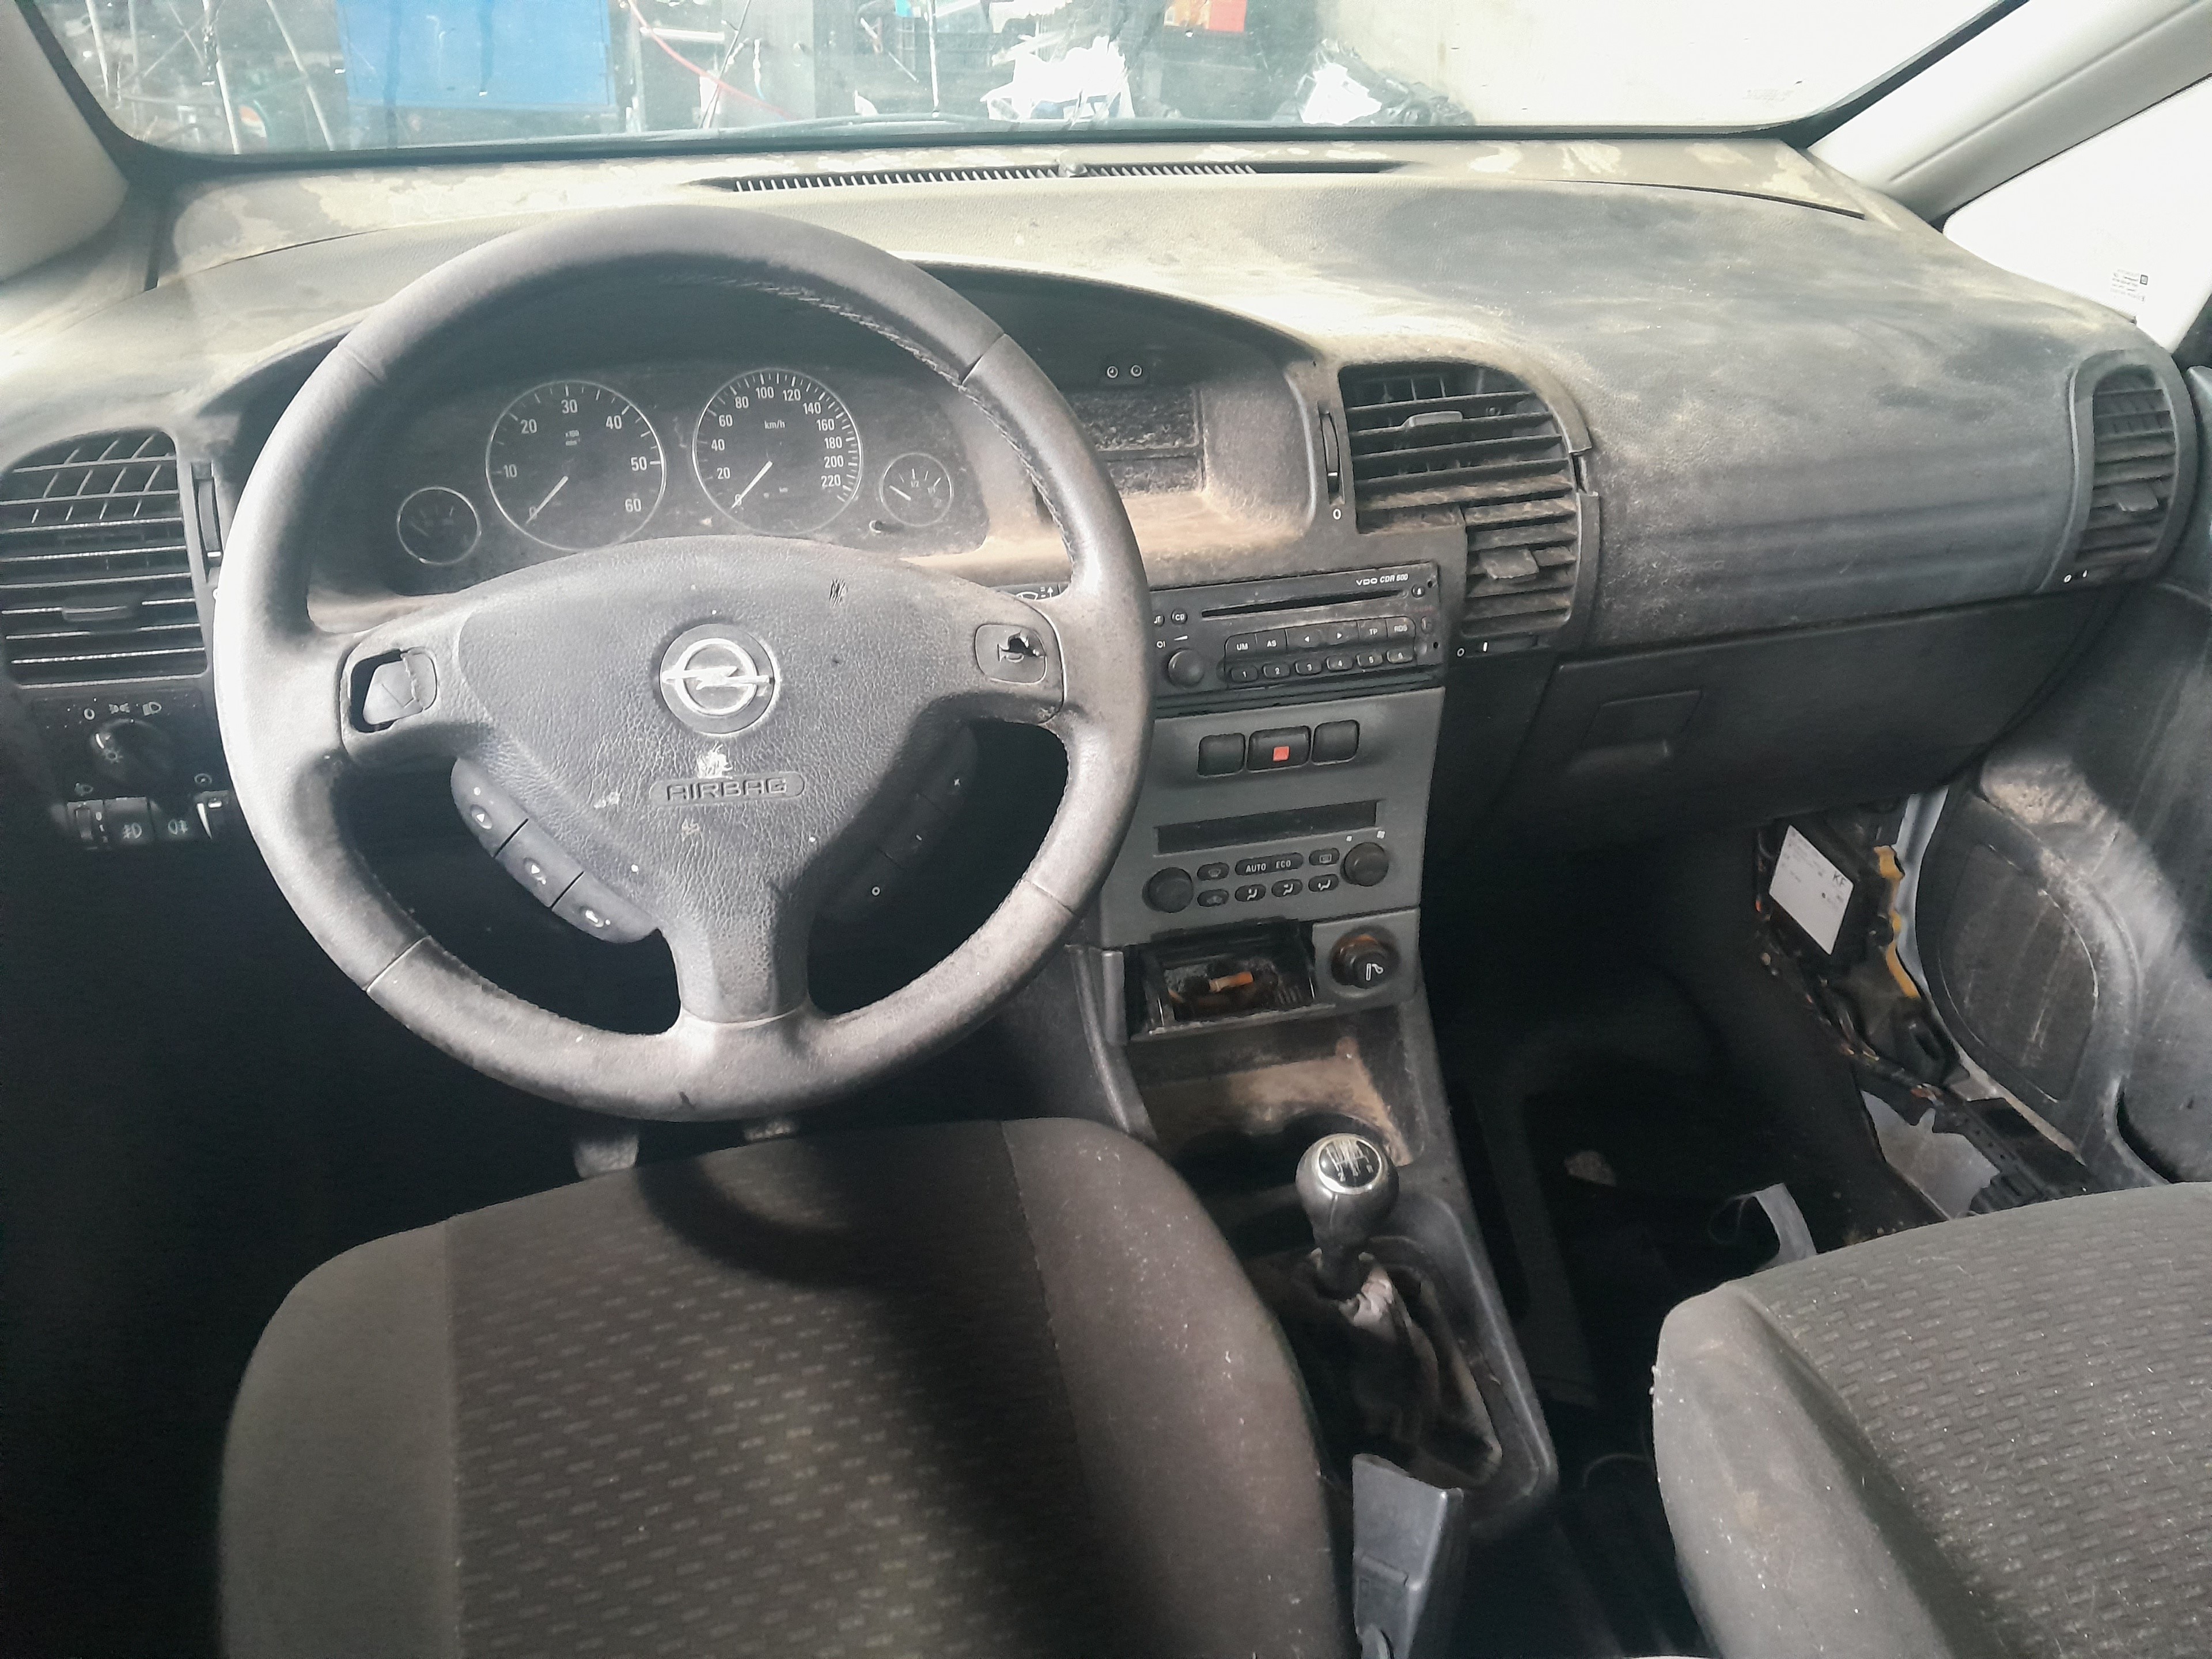 OPEL Corsa B (1993-2000) Other Interior Parts 13106240 22556885